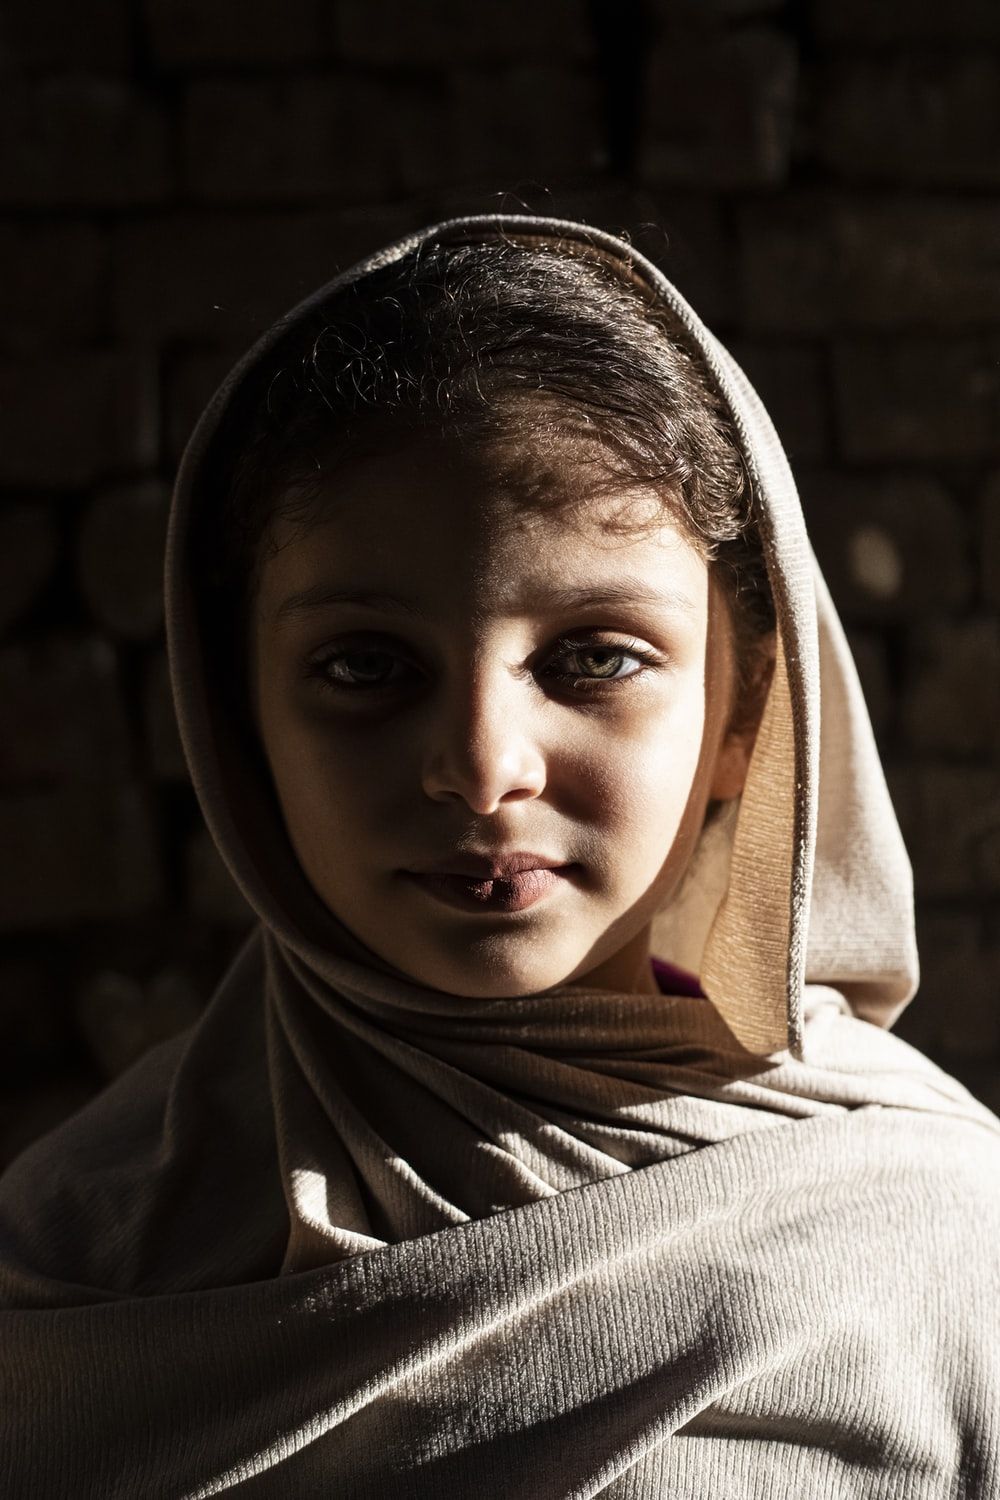 Muslim Child Picture. Download Free Image